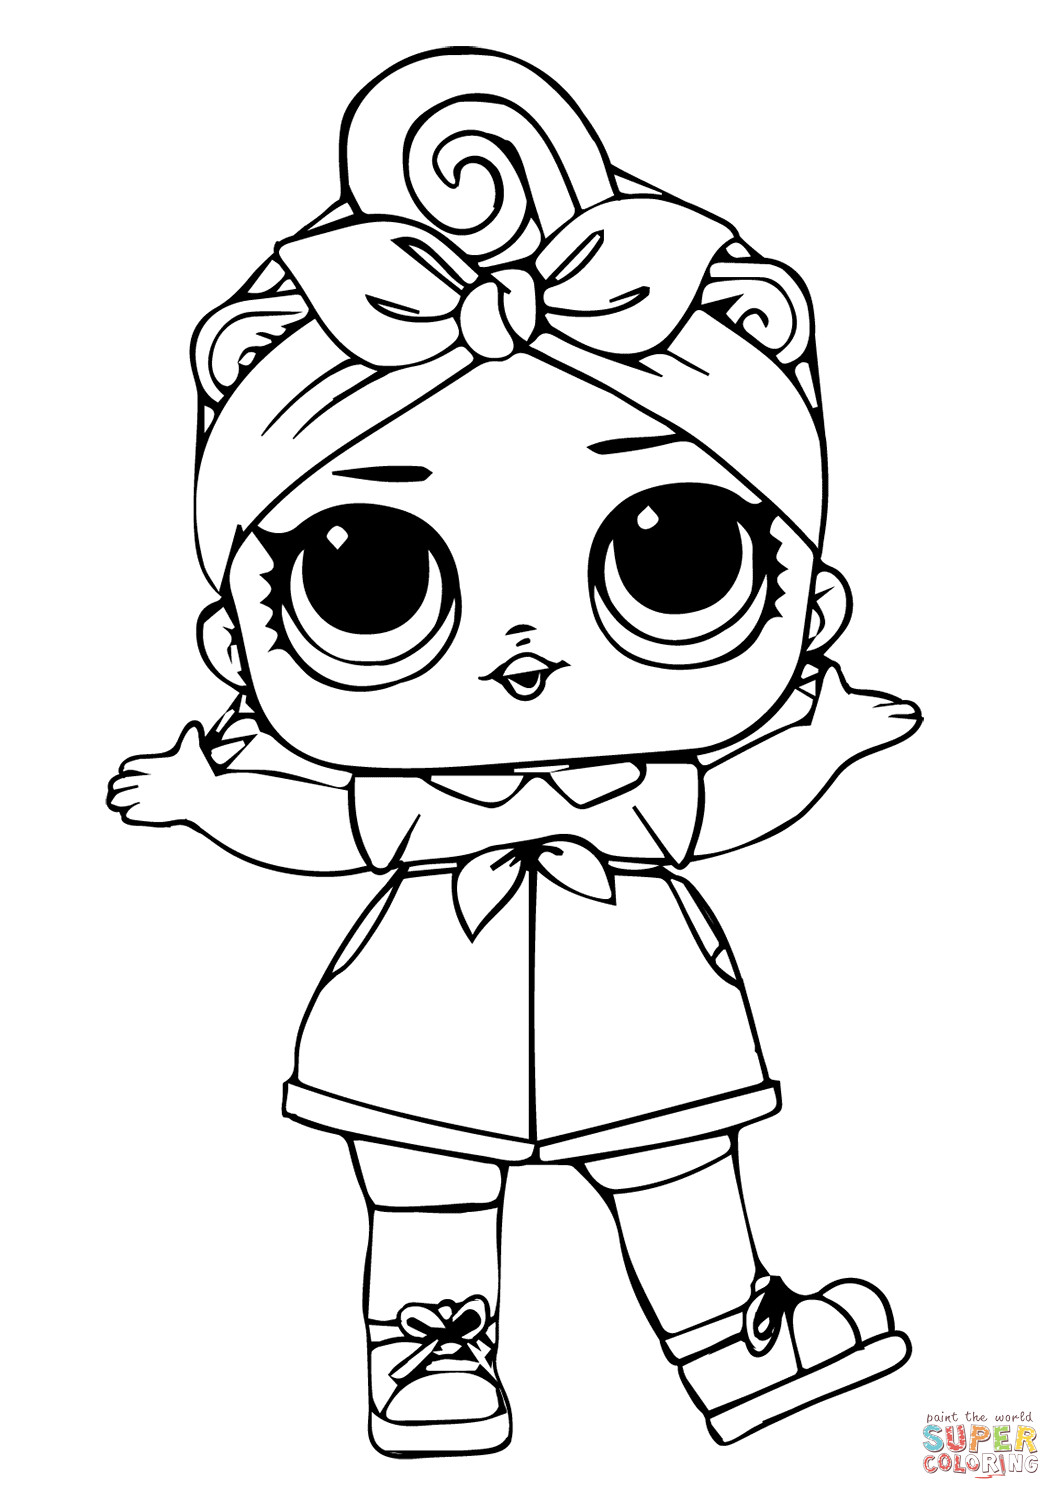 21 Ideas for Lol Doll Coloring Pages Printable - Home Inspiration and ...